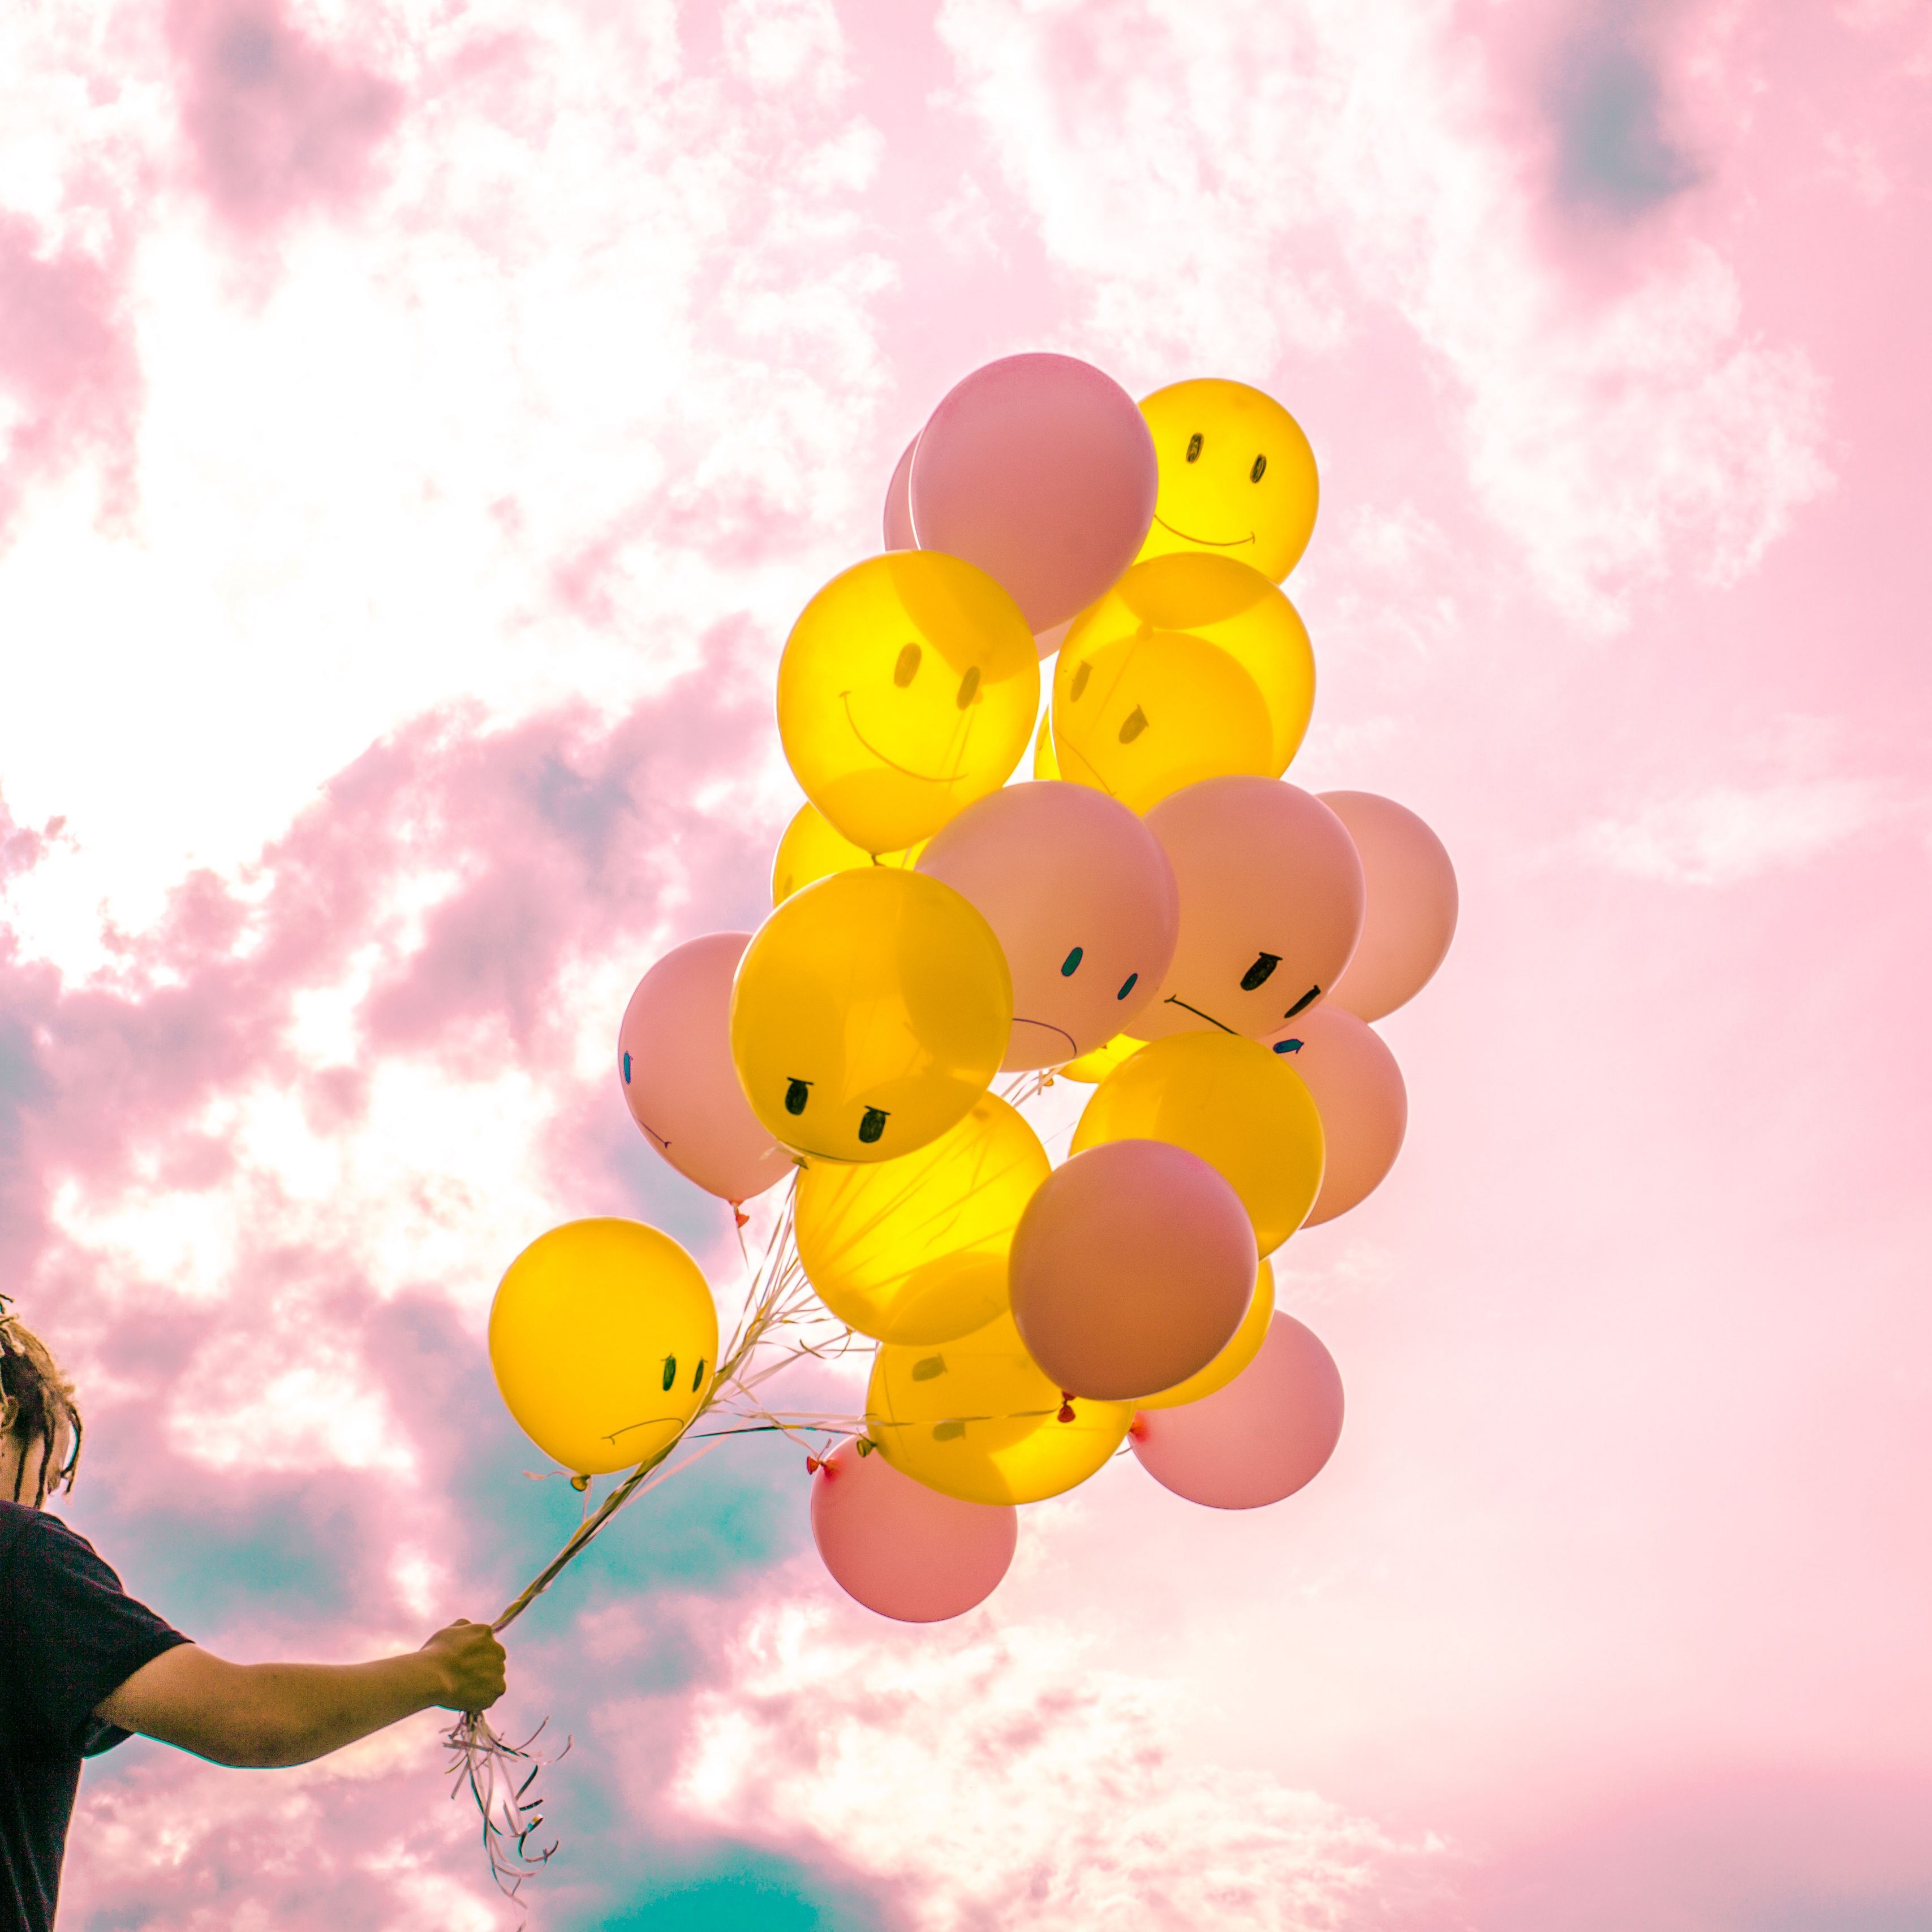 Download wallpaper 3415x3415 balloons, sky, pink, yellow ipad pro 12.9 retina for parallax HD background